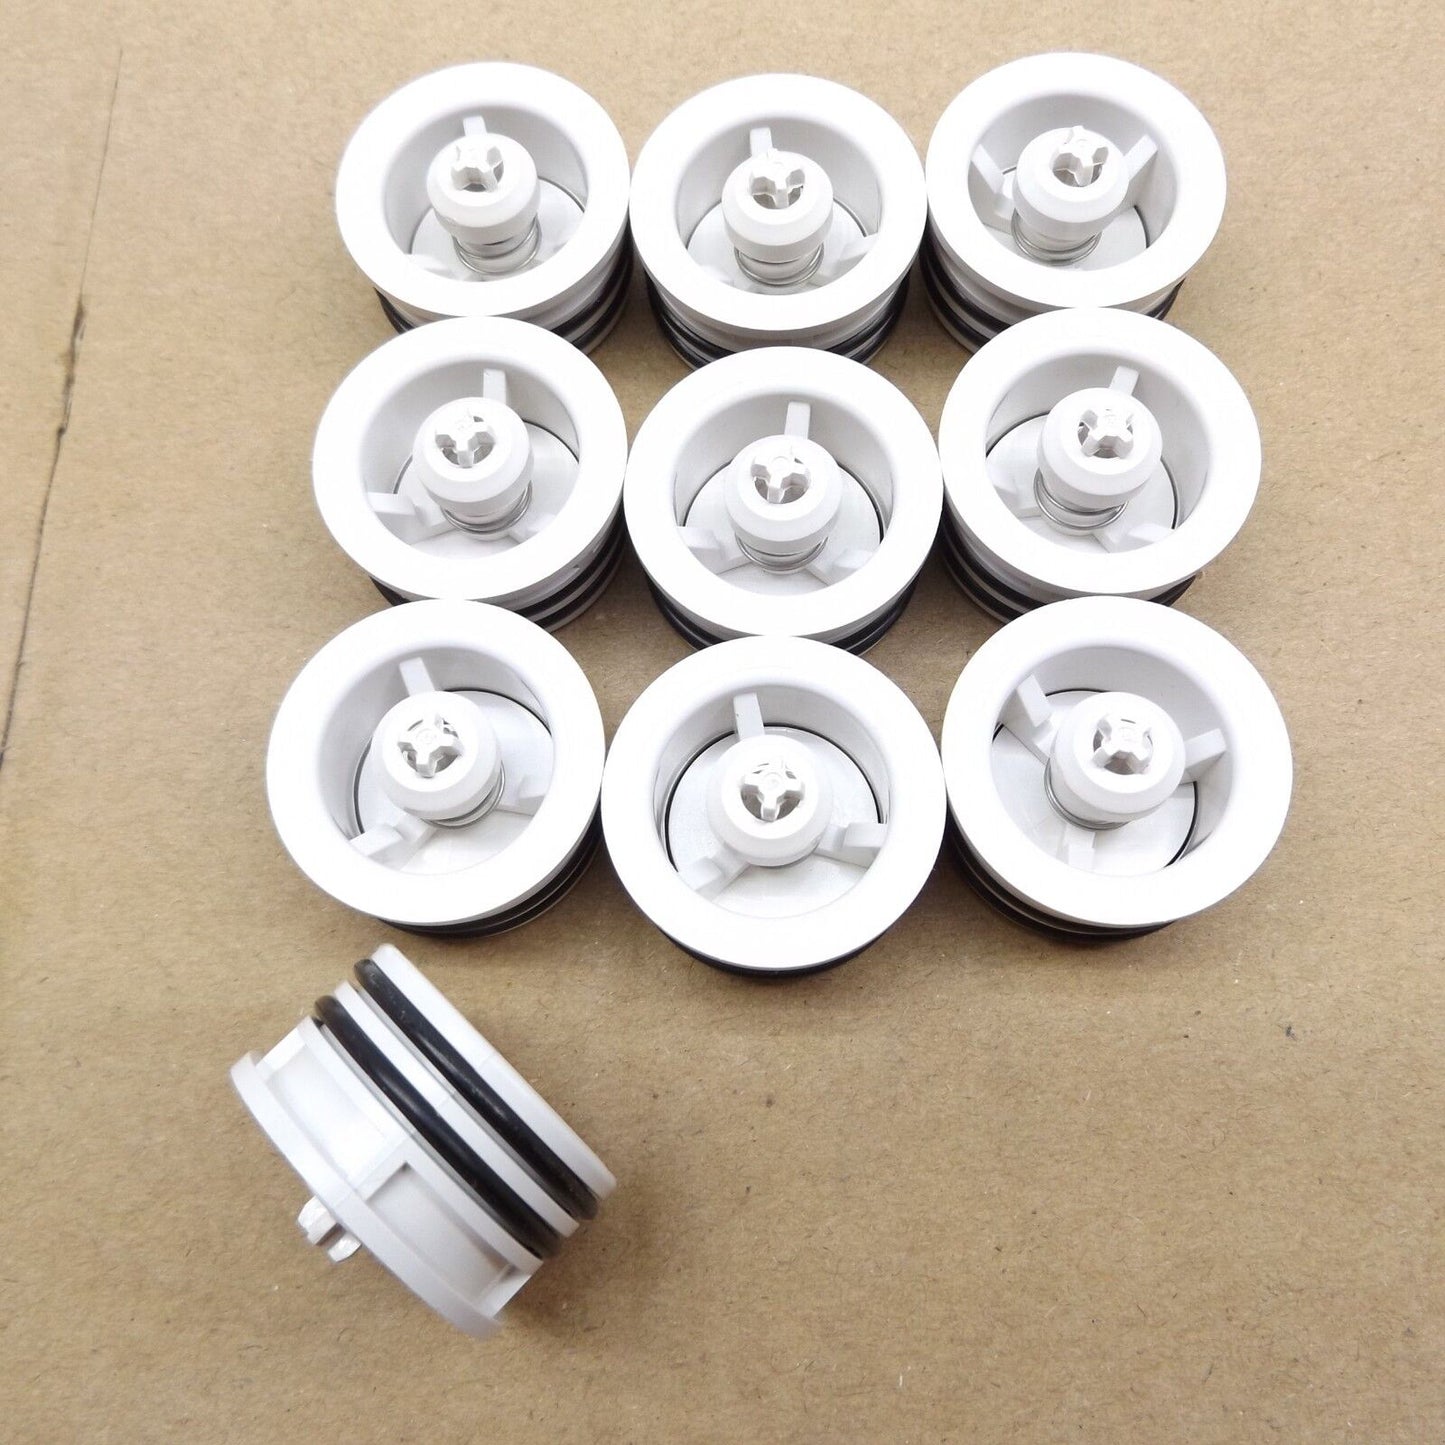 LOT OF 10 HONEYWELL AMCU200 SMALL UNION CHECK VALVE FOR AM-1 AMX-1 MIXING VALVE